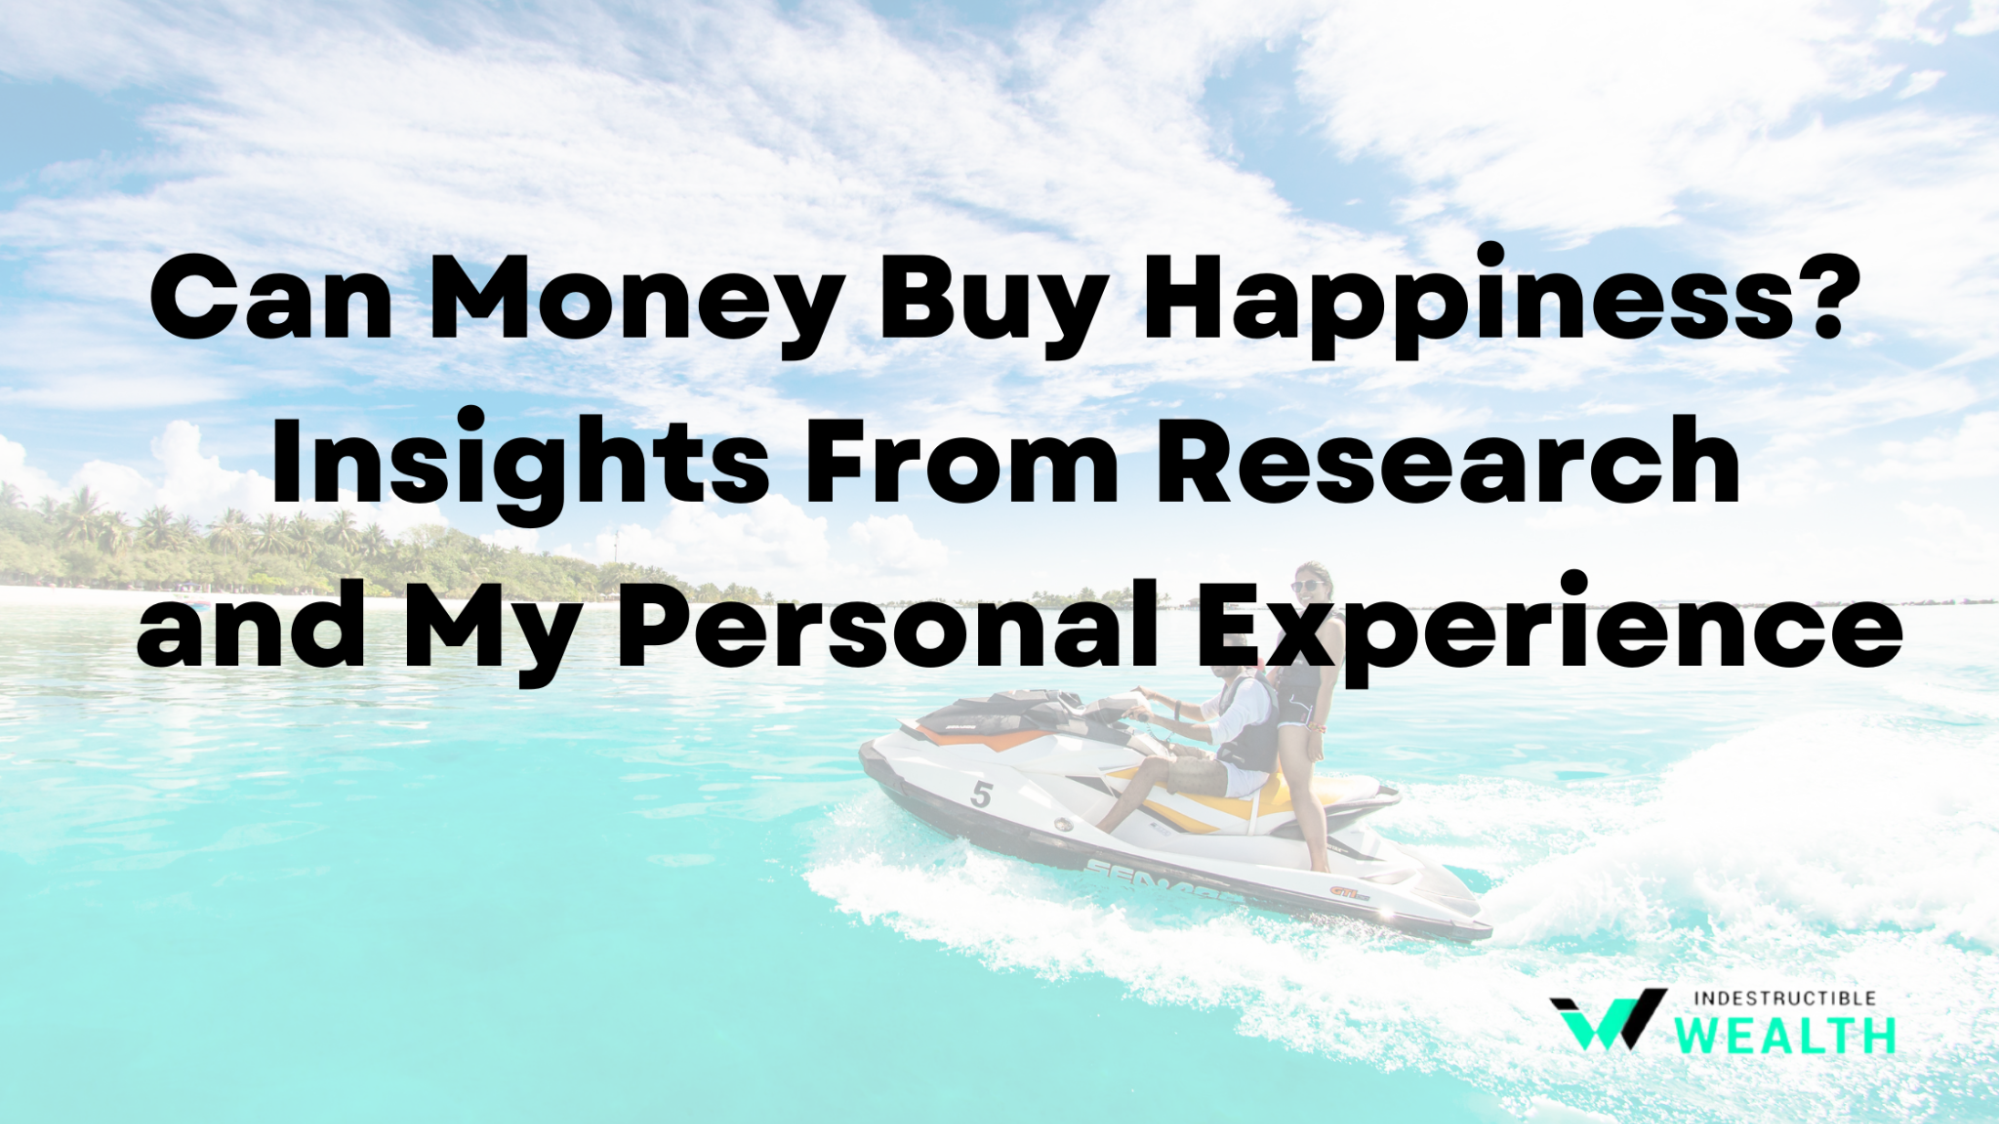 Can Money Buy Happiness? Insights From Research and My Personal Experience